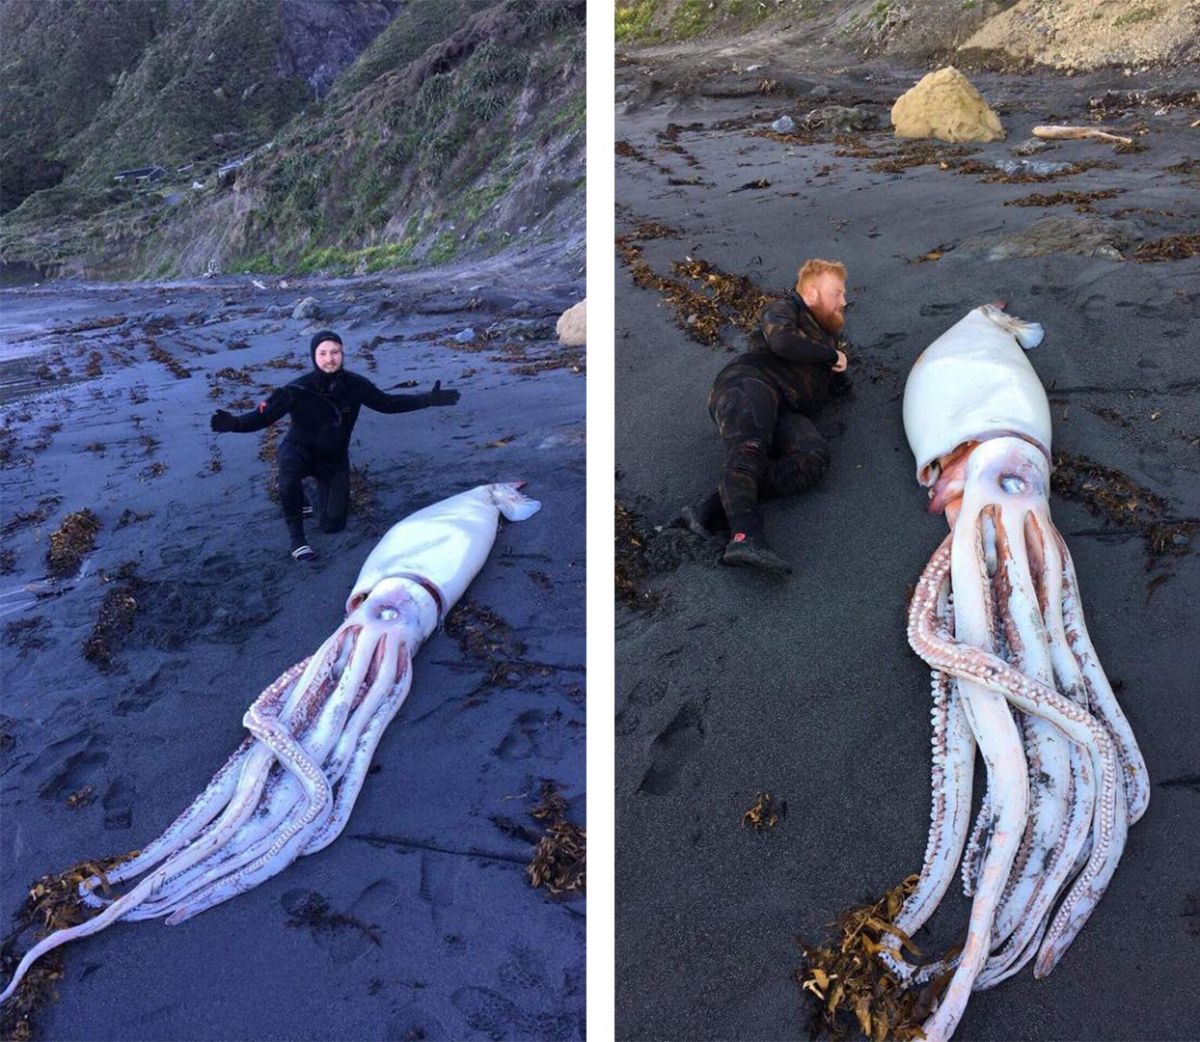 In New Zealand, Found A Giant Squid